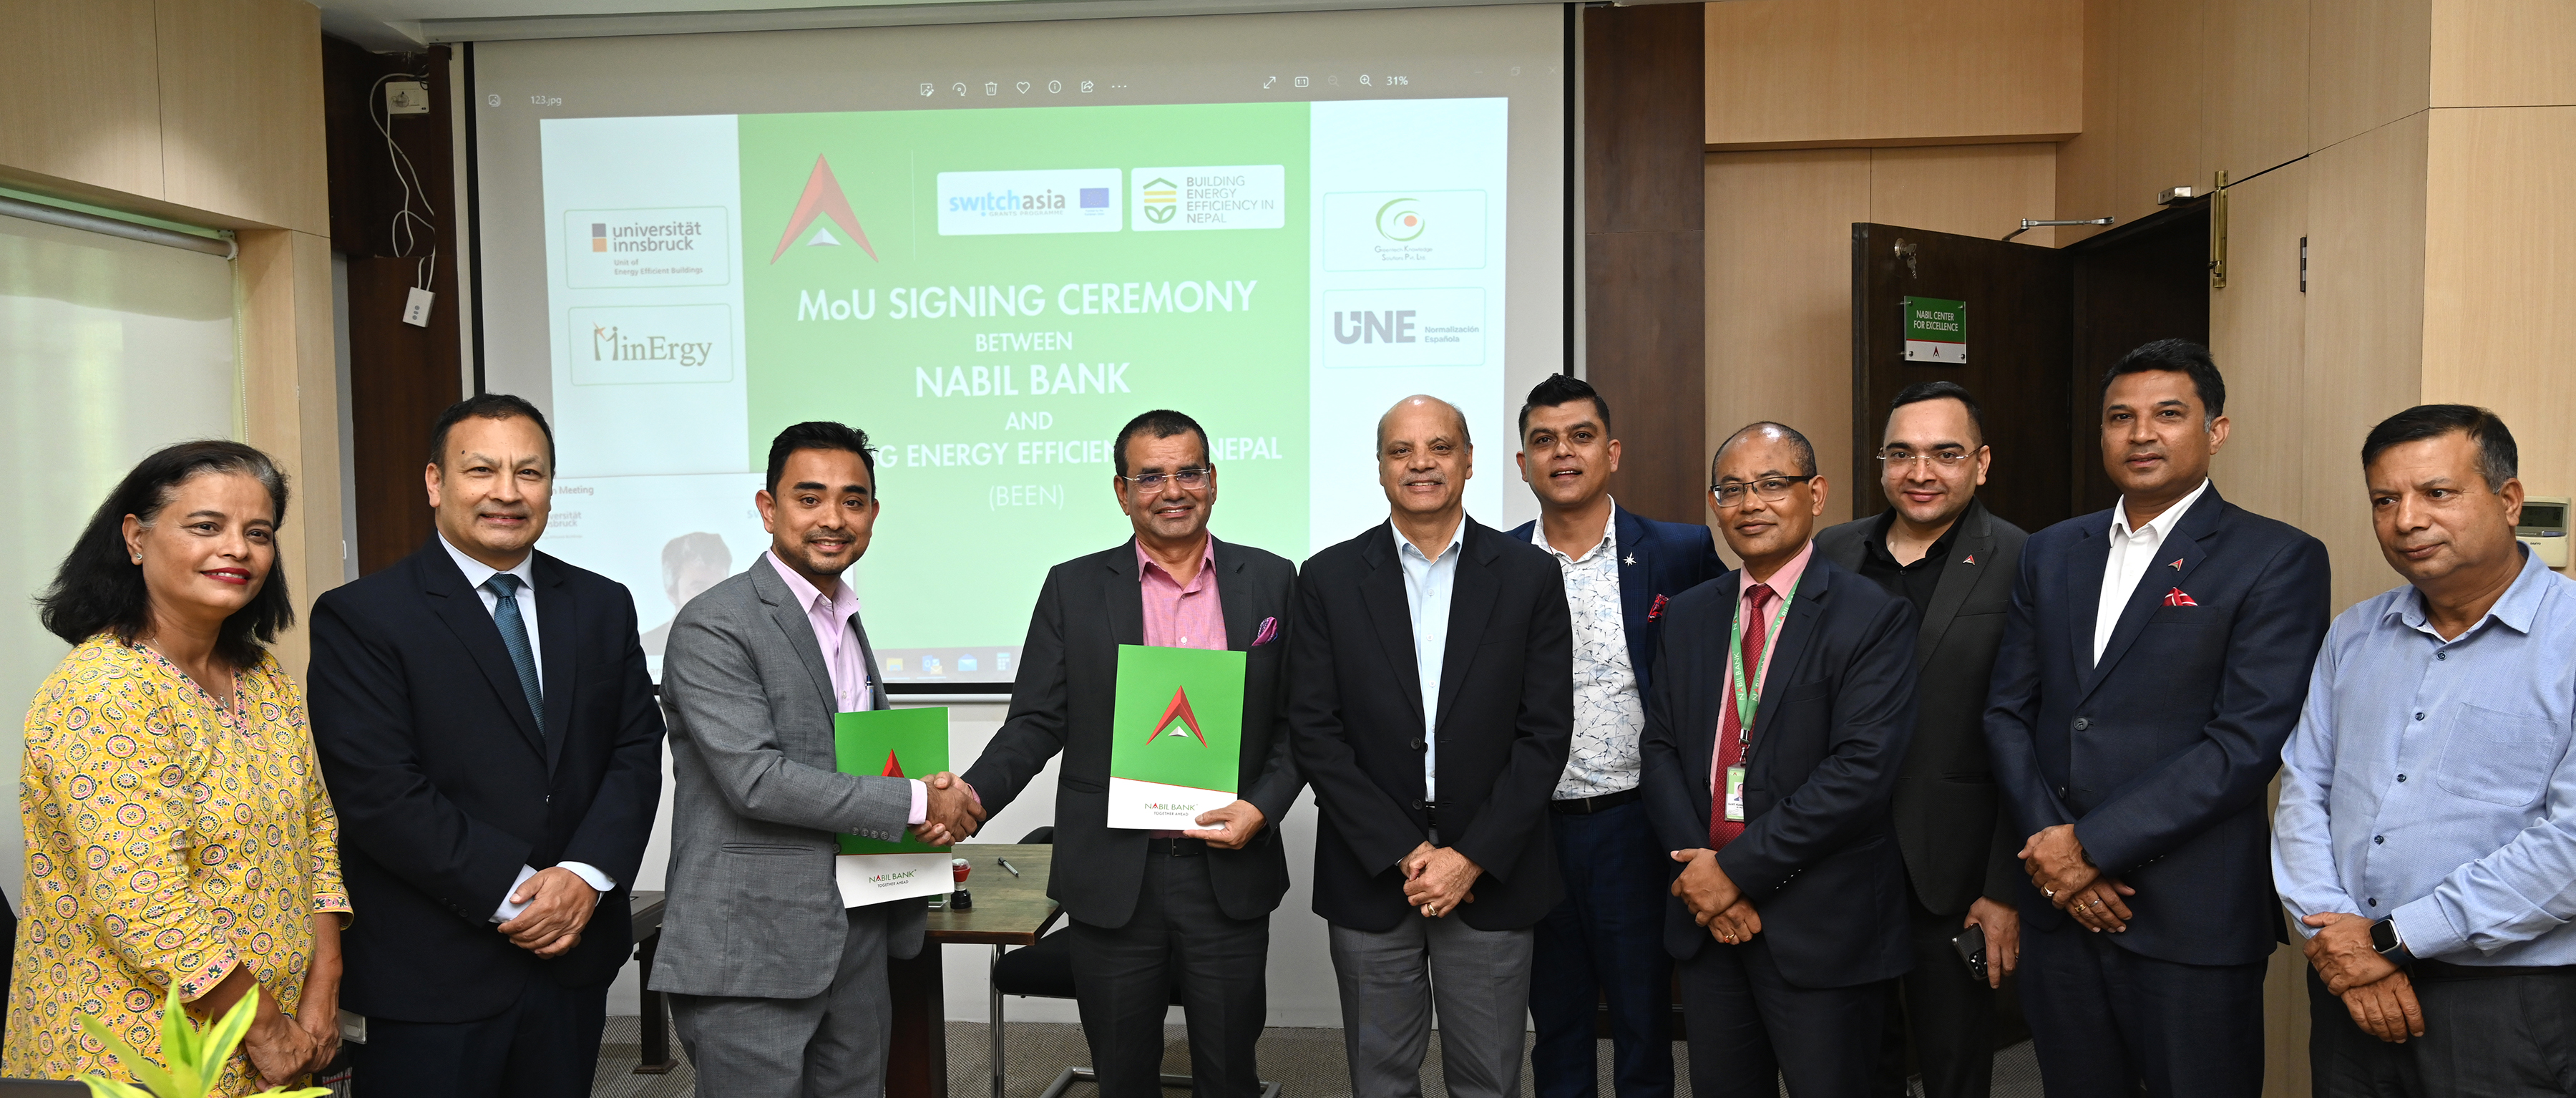 Nabil Bank and EU-funded project team up for sustainable housing in Nepal